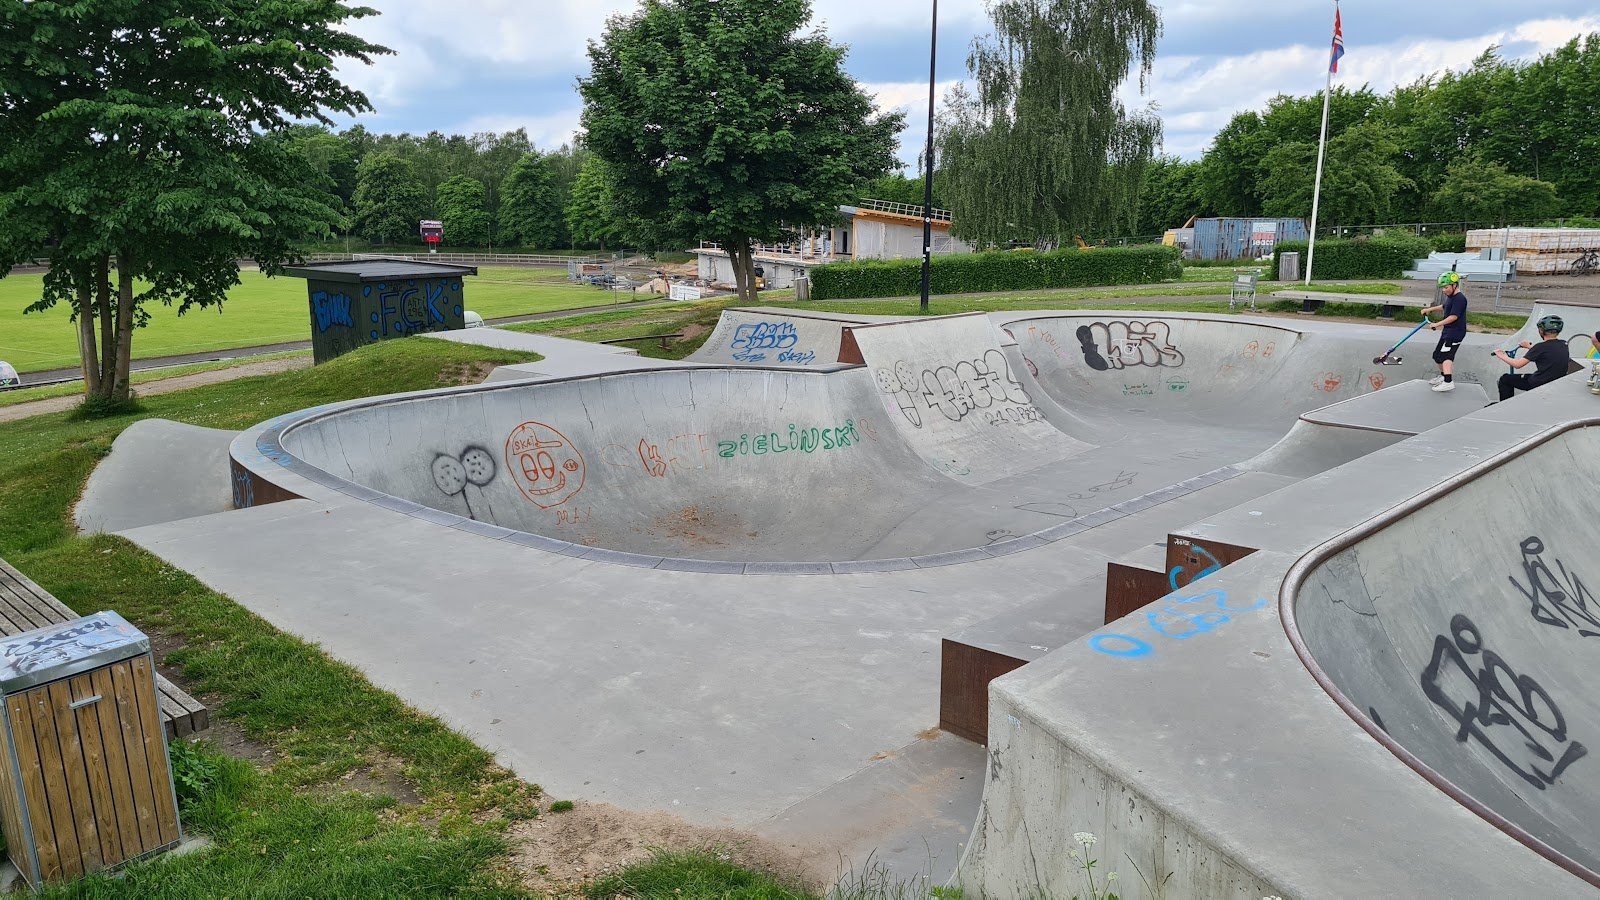 Hørsholm skatepark is a newly built made of black wood and steel on a concrete foundation. The park’s quarter pipes and banks are placed at the edge of the park so that skaters can maintain speed and flow throughout the park. In addition, the obstacles of the park are made of wood so that it is possible to move them around if needed. There is also a large manual pad course with more quarters and grind boxes.The park is definitely worth a visit as the quality of the park and its design is very professional. The transfer course is probably the most unique element of the park. Here, there are both quarter pipes, banks, spines and ledges. This course is perfect for doing airs, transfers and grinds. The park’s mini vert is on the other side. Here, there are great opportunities for you to practise your tricks and the mini vert appeals to all skaters regardless of their level as it is 1,5 metres high.Hørsholm Skatepark has been expanded with a bowl. You can see the bowl in some of our pictures. The bowl is located at Stadionallé 7. The bowl is designed by FRS Beton together with Beaver Concrete. Wonder Concrete and Enr have established the low part of it as well as the mini ramp.Pivotech enriched us with a lot of skateparks: Kolding Skatepark, Feldballe Skatepark and MPH to mention some of them.You can follow Pivotech and their projects on facebook.This expansion was described in August, 2014.